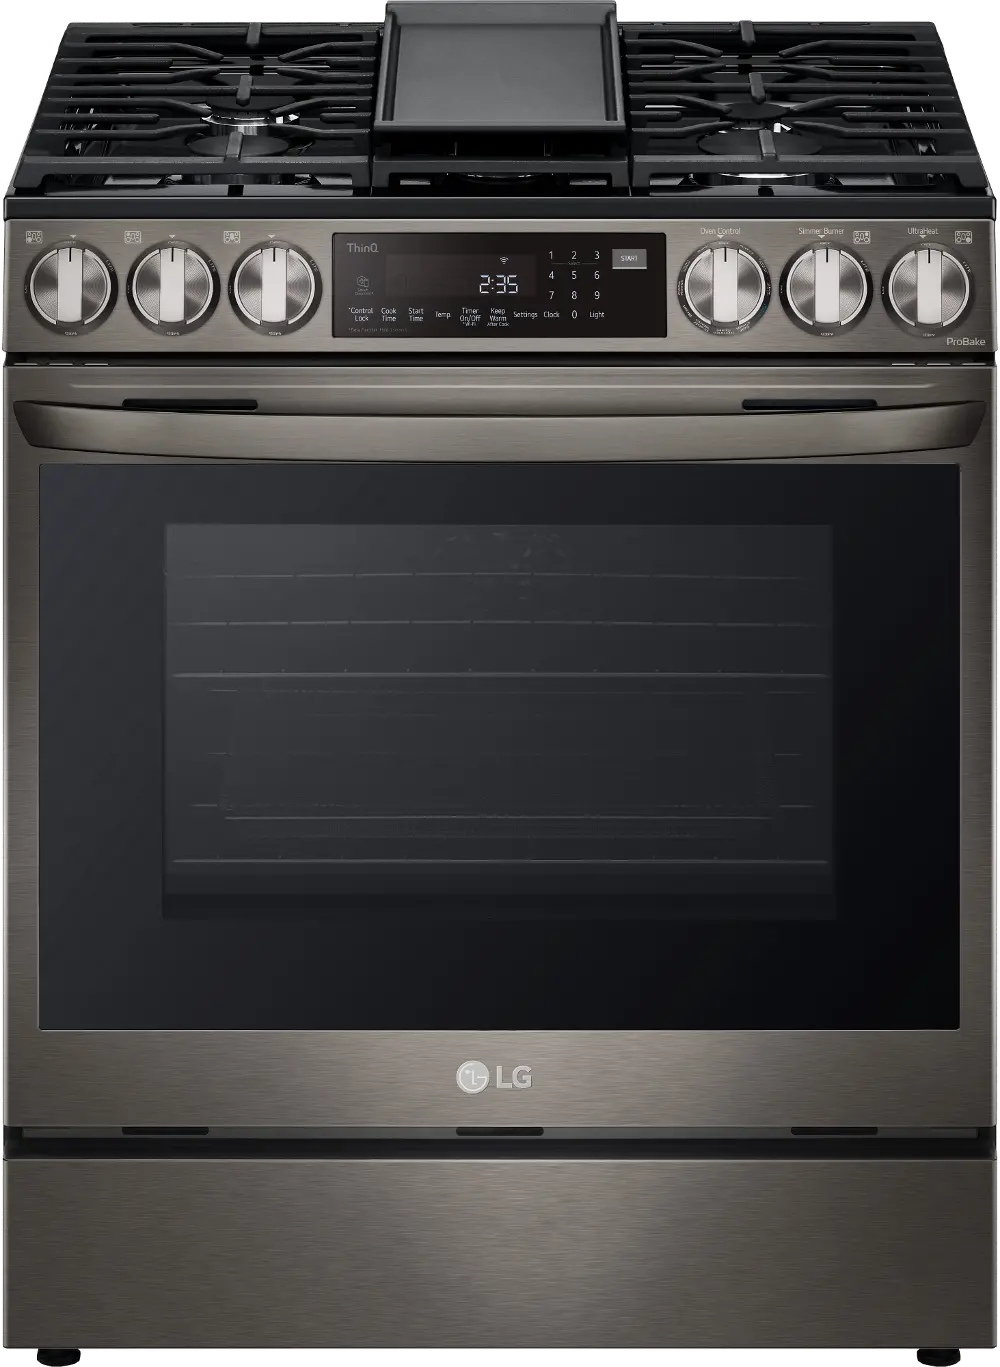 LSGL6335D LG 6.3 cu ft Gas Range with InstaView - Black Stainless Steel-1